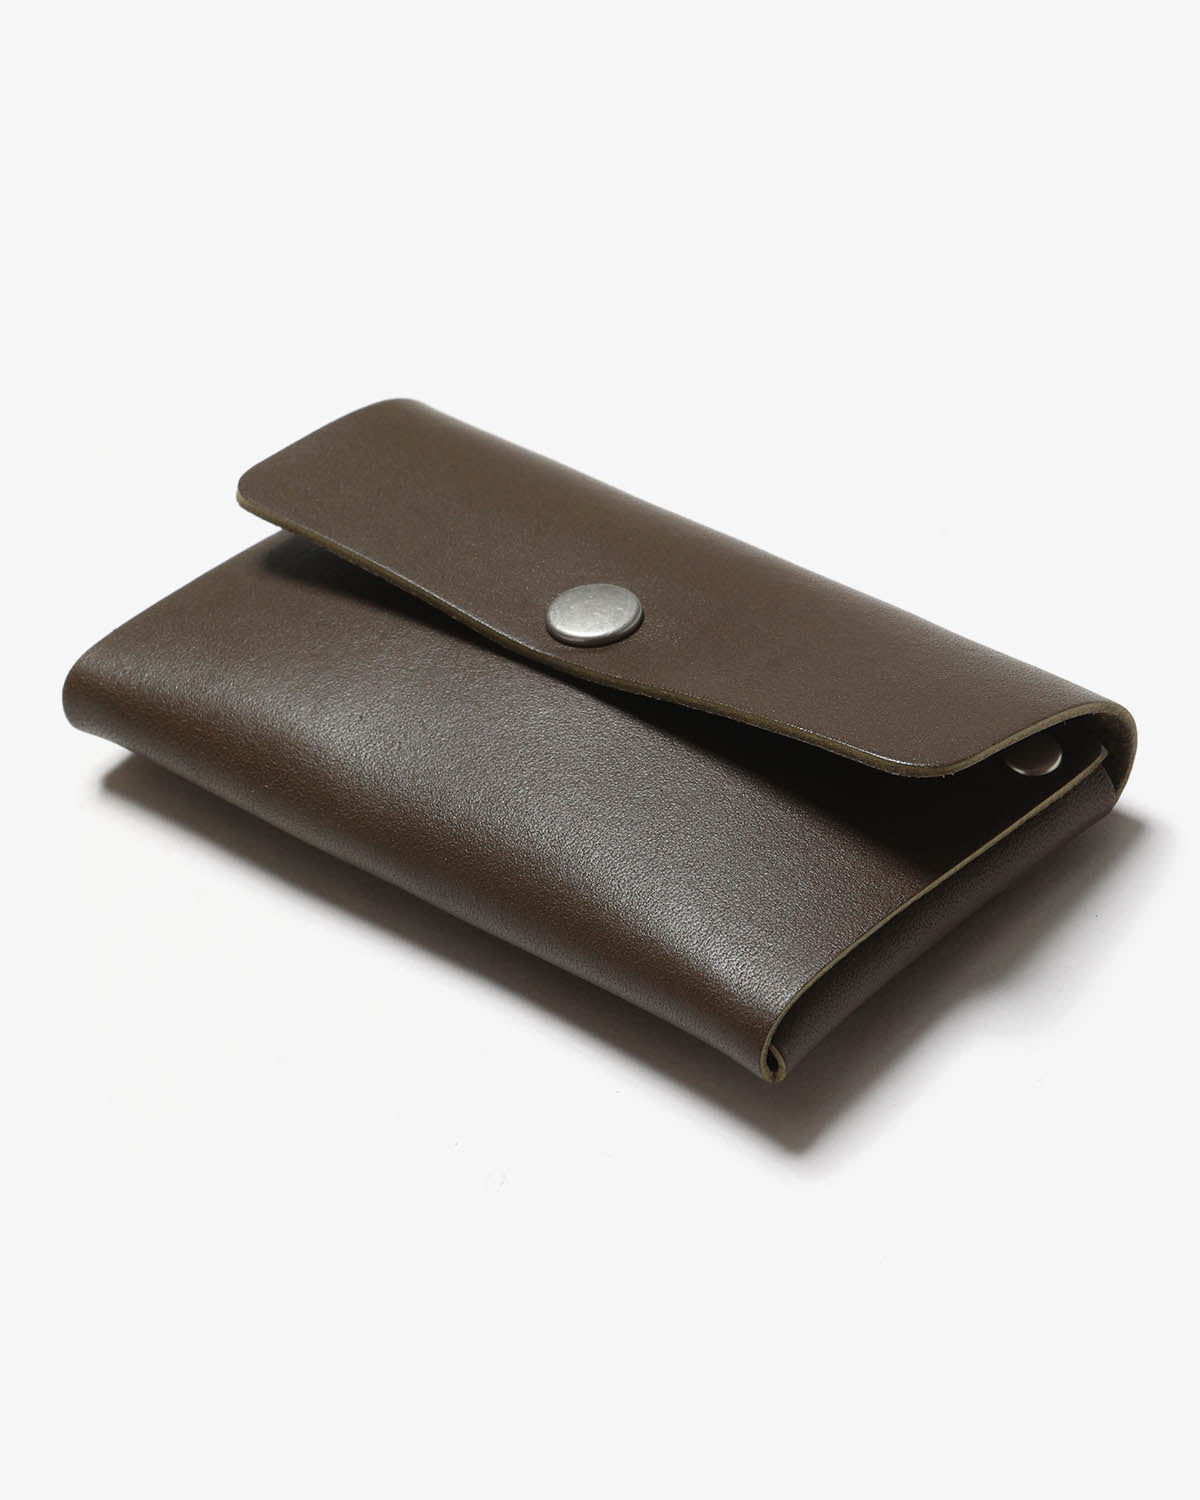 CARD CASE COW LEATHER